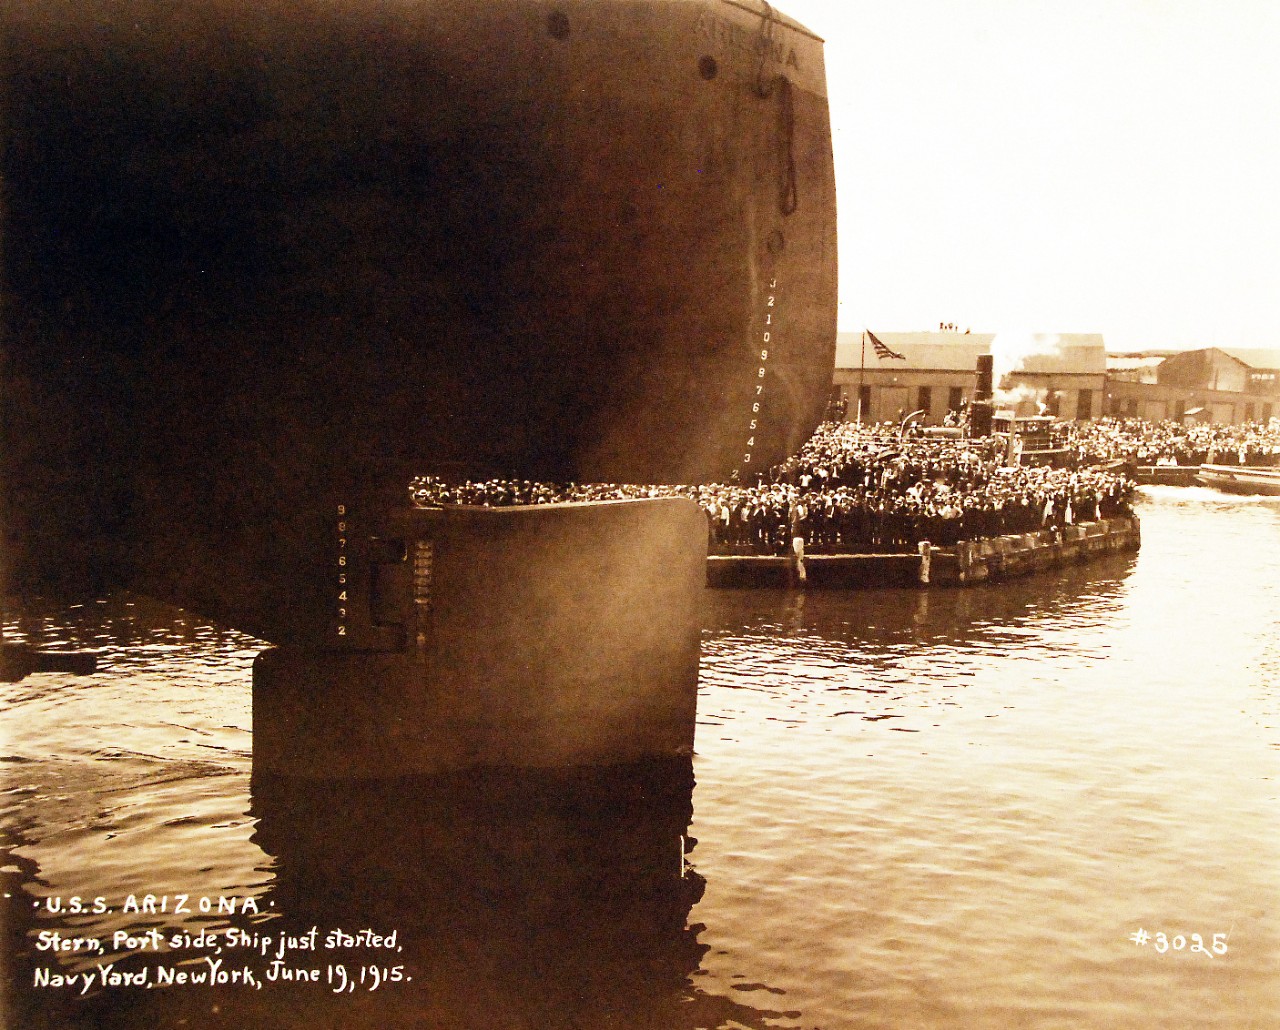 <p>19-LC-19A-4: USS Arizona (BB 39), stern, port side, ship just started during launching at New York Navy Yard, New York City, June 19, 1915.</p>
